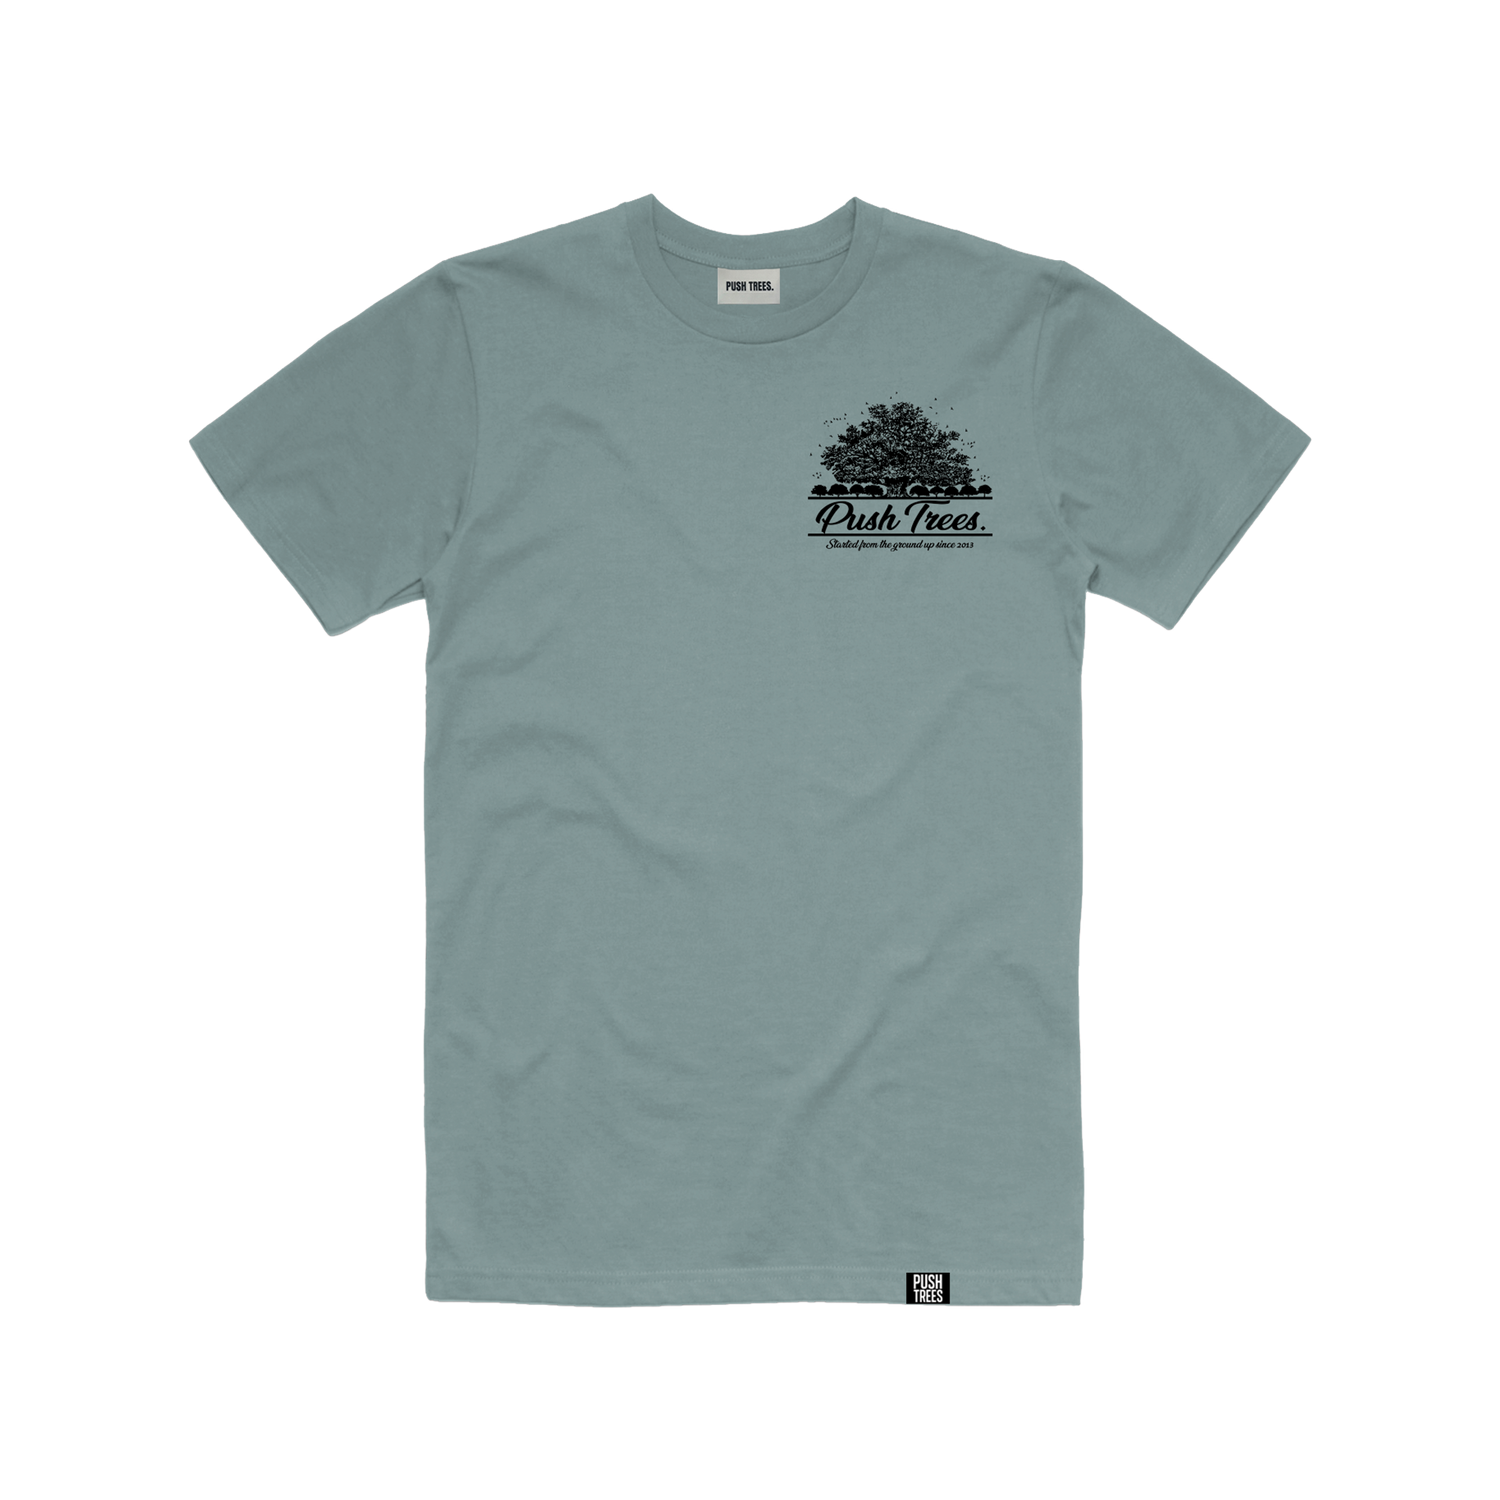 The Winery Tee (Blue)